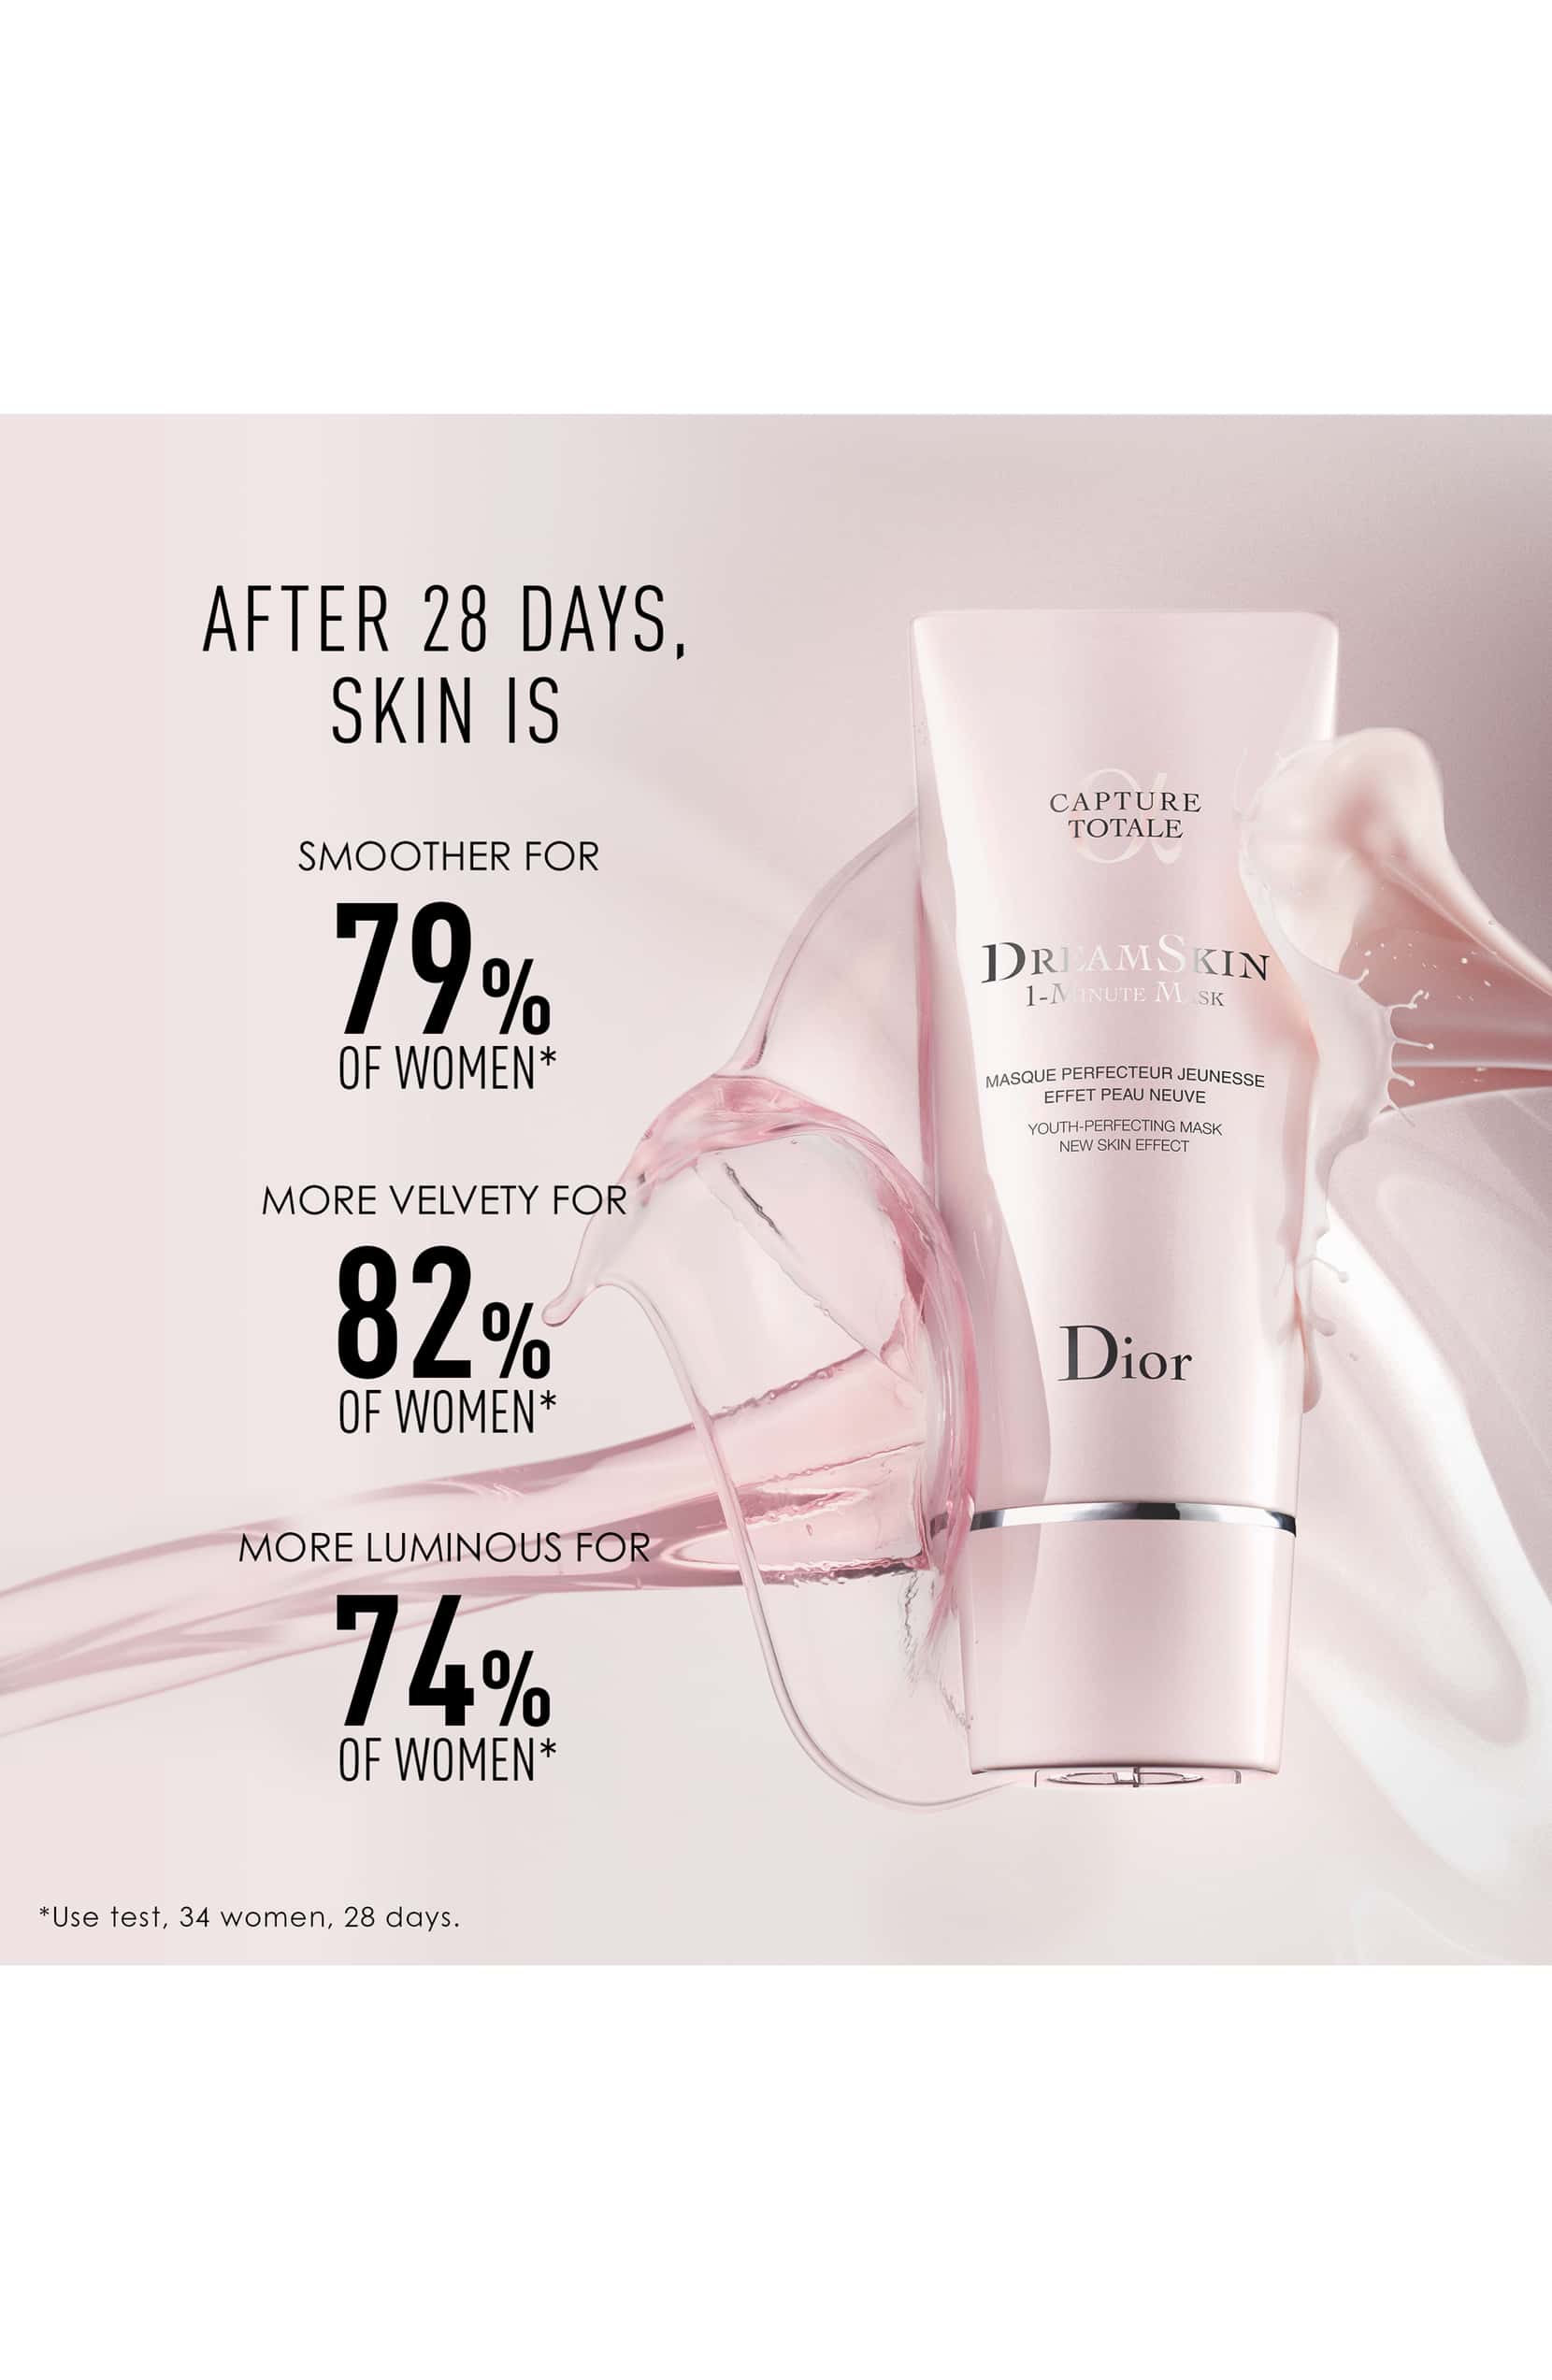 Dior Capture Dreamskin - 1-Minute Mask - Youth-Perfecting Mask - New Skin Effect